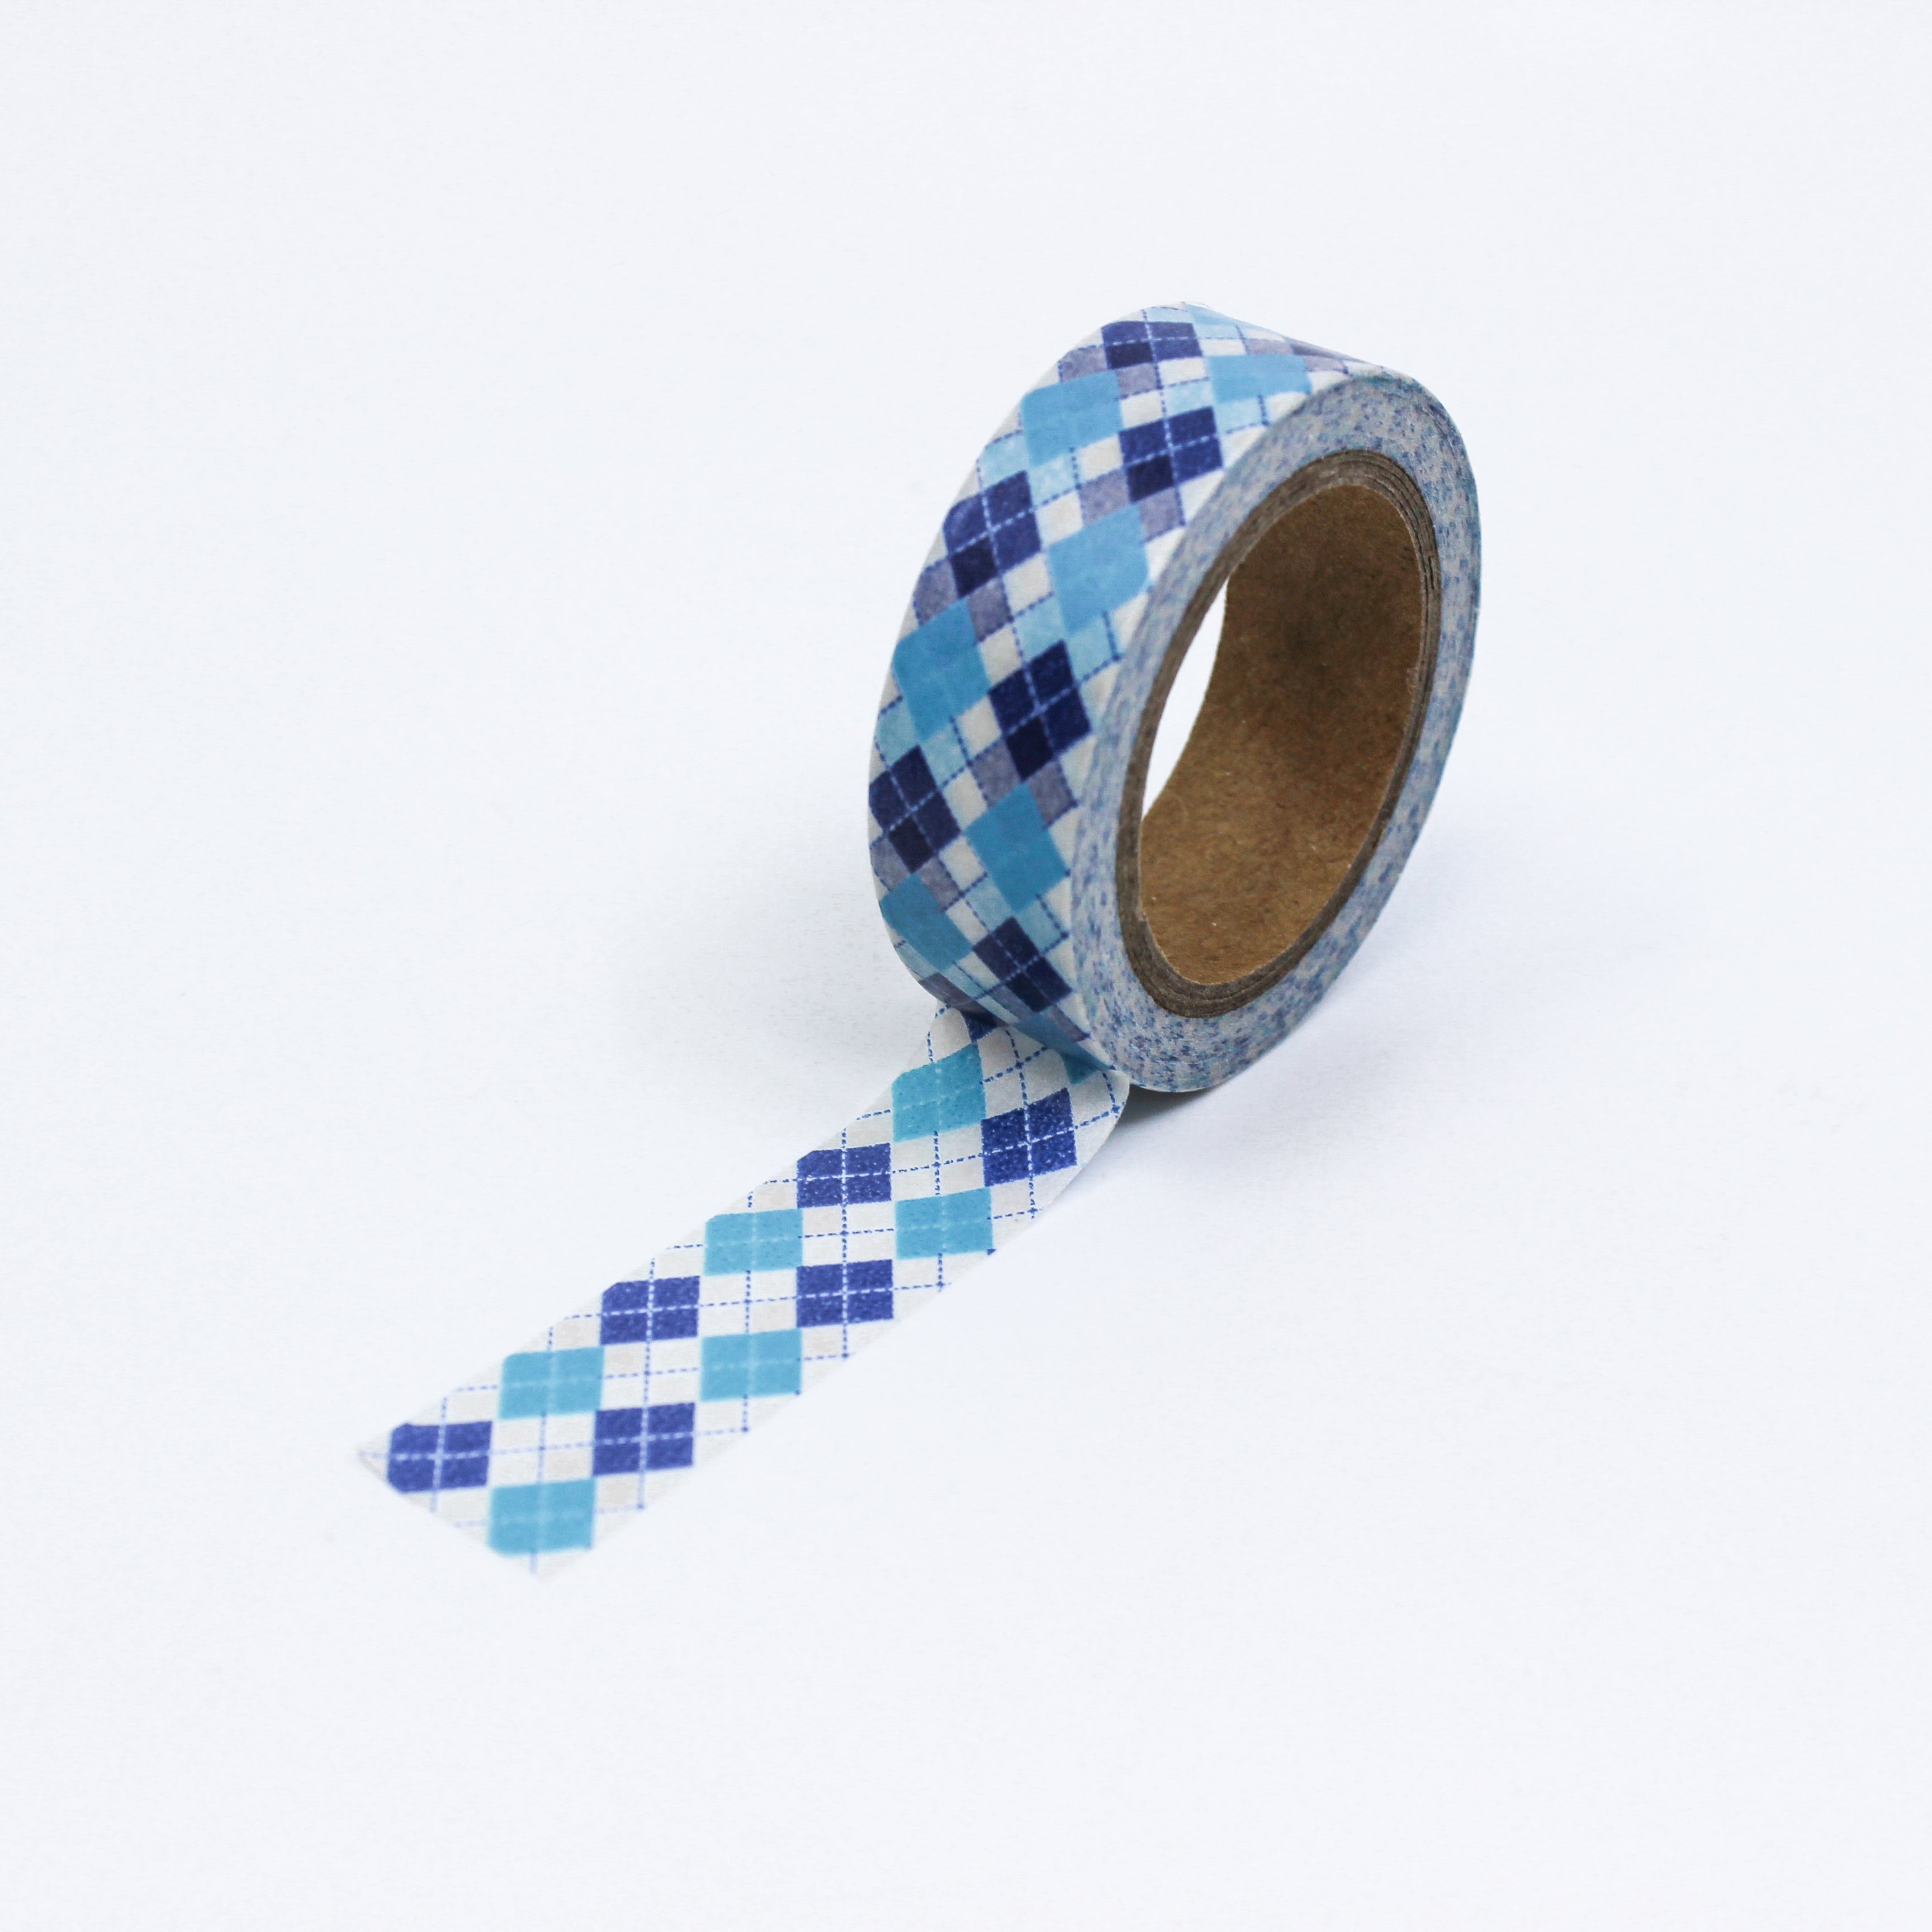 This is a full pattern repeat view of blue plaid washi tape BBB Supplies Craft Shop